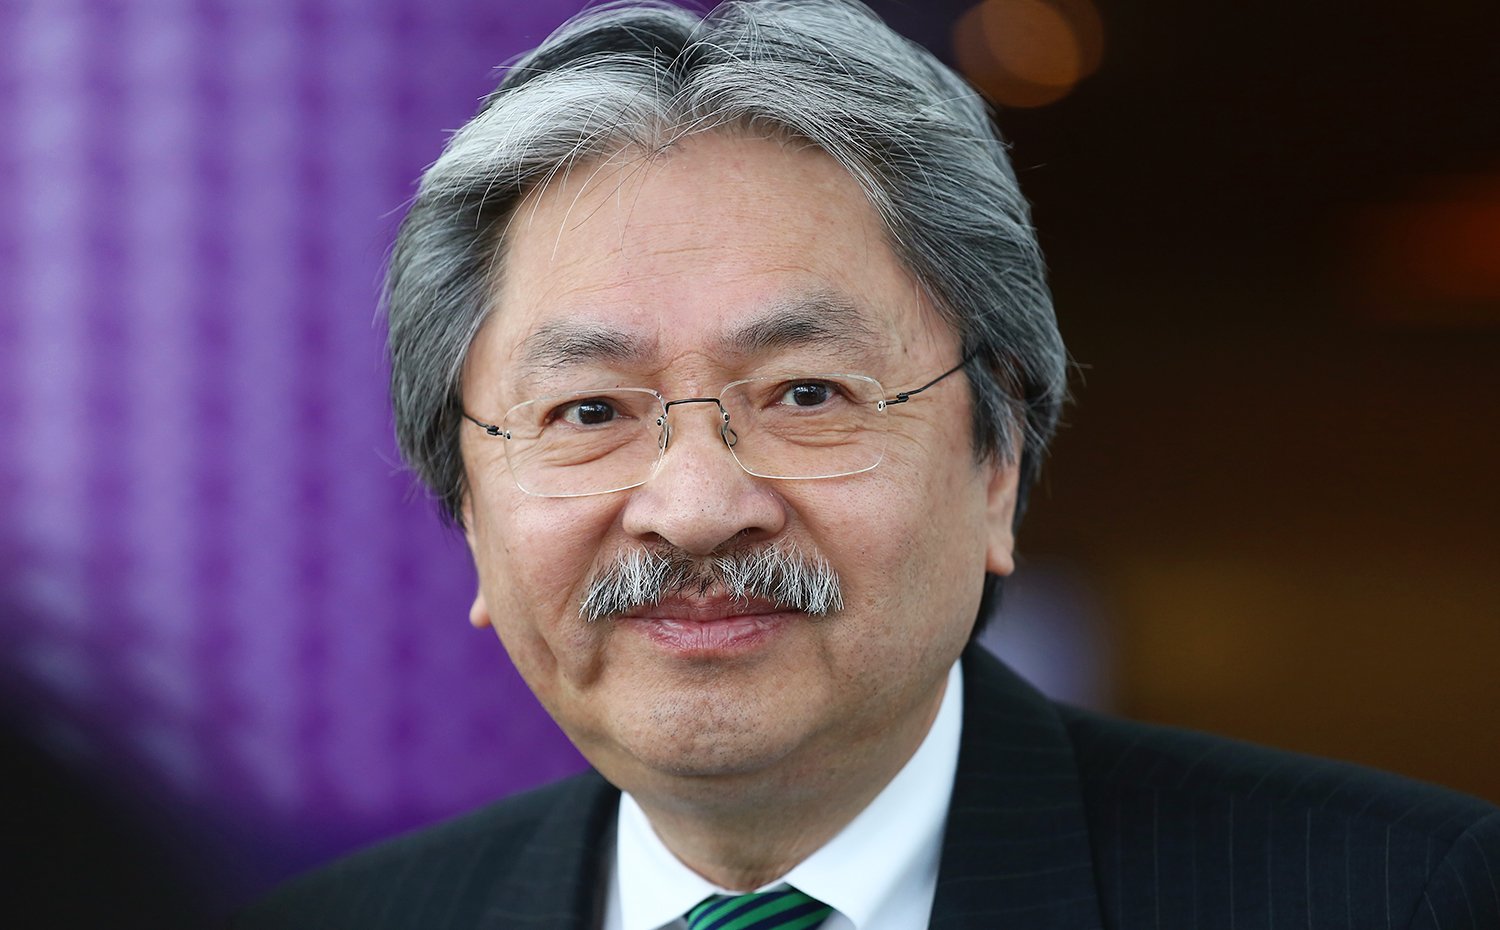 Financial Secretary John Tsang Chun-wah speaks to the press after his welcome address at the plenary session of the Acadamia International Conference on Hong Kong and the World under the Belt and Road Initiative, held at Cheng Yu Tung Building in CUHK. 17DEC15 SCMP/Jonathan Wong